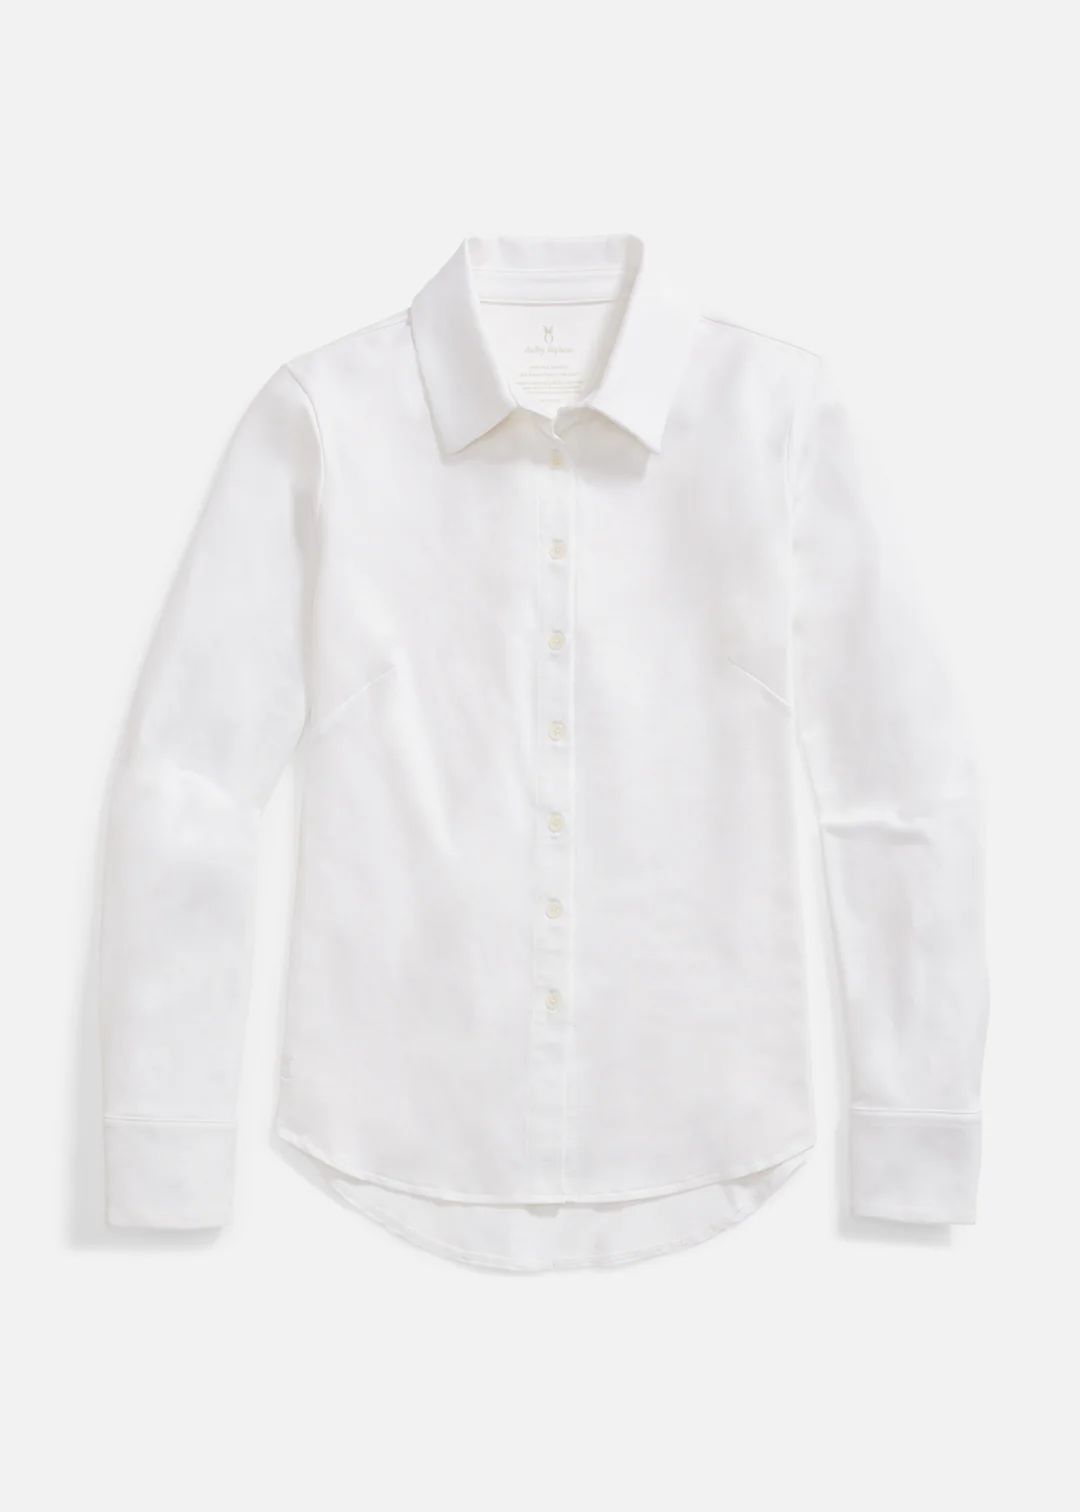 Beaufort Button Down in Repreve® Stretch (White) | Dudley Stephens